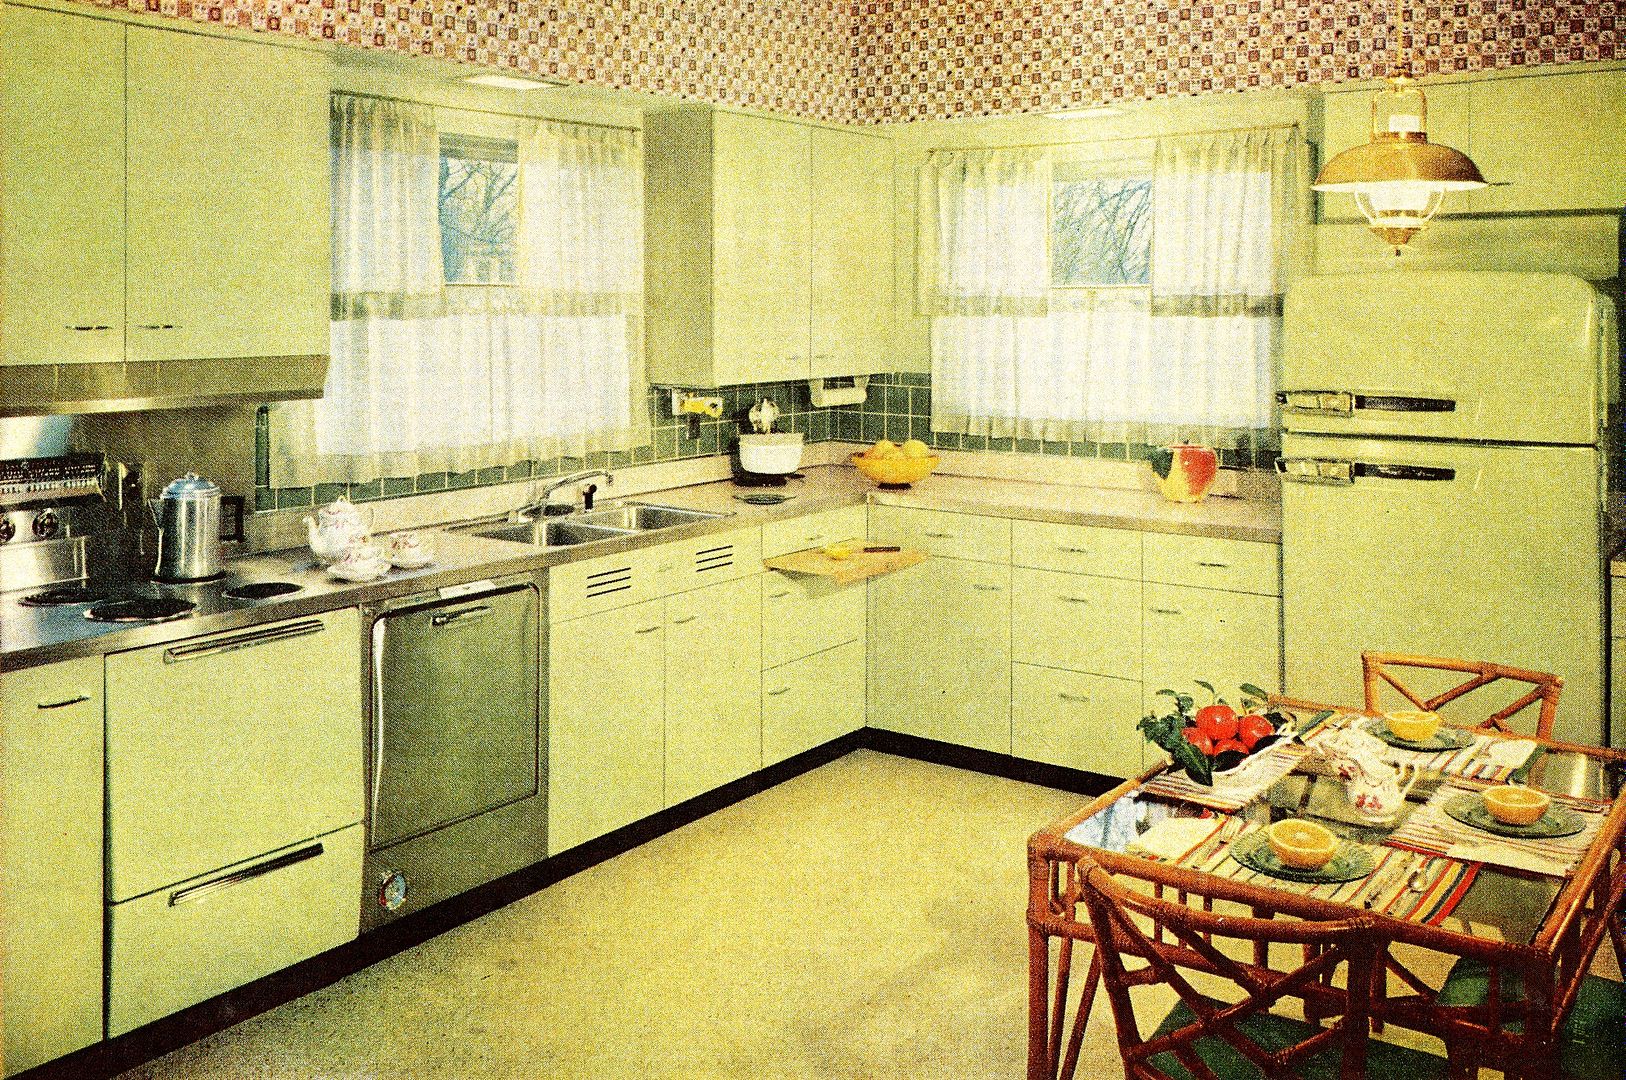 1959 kitchen and bar reservations